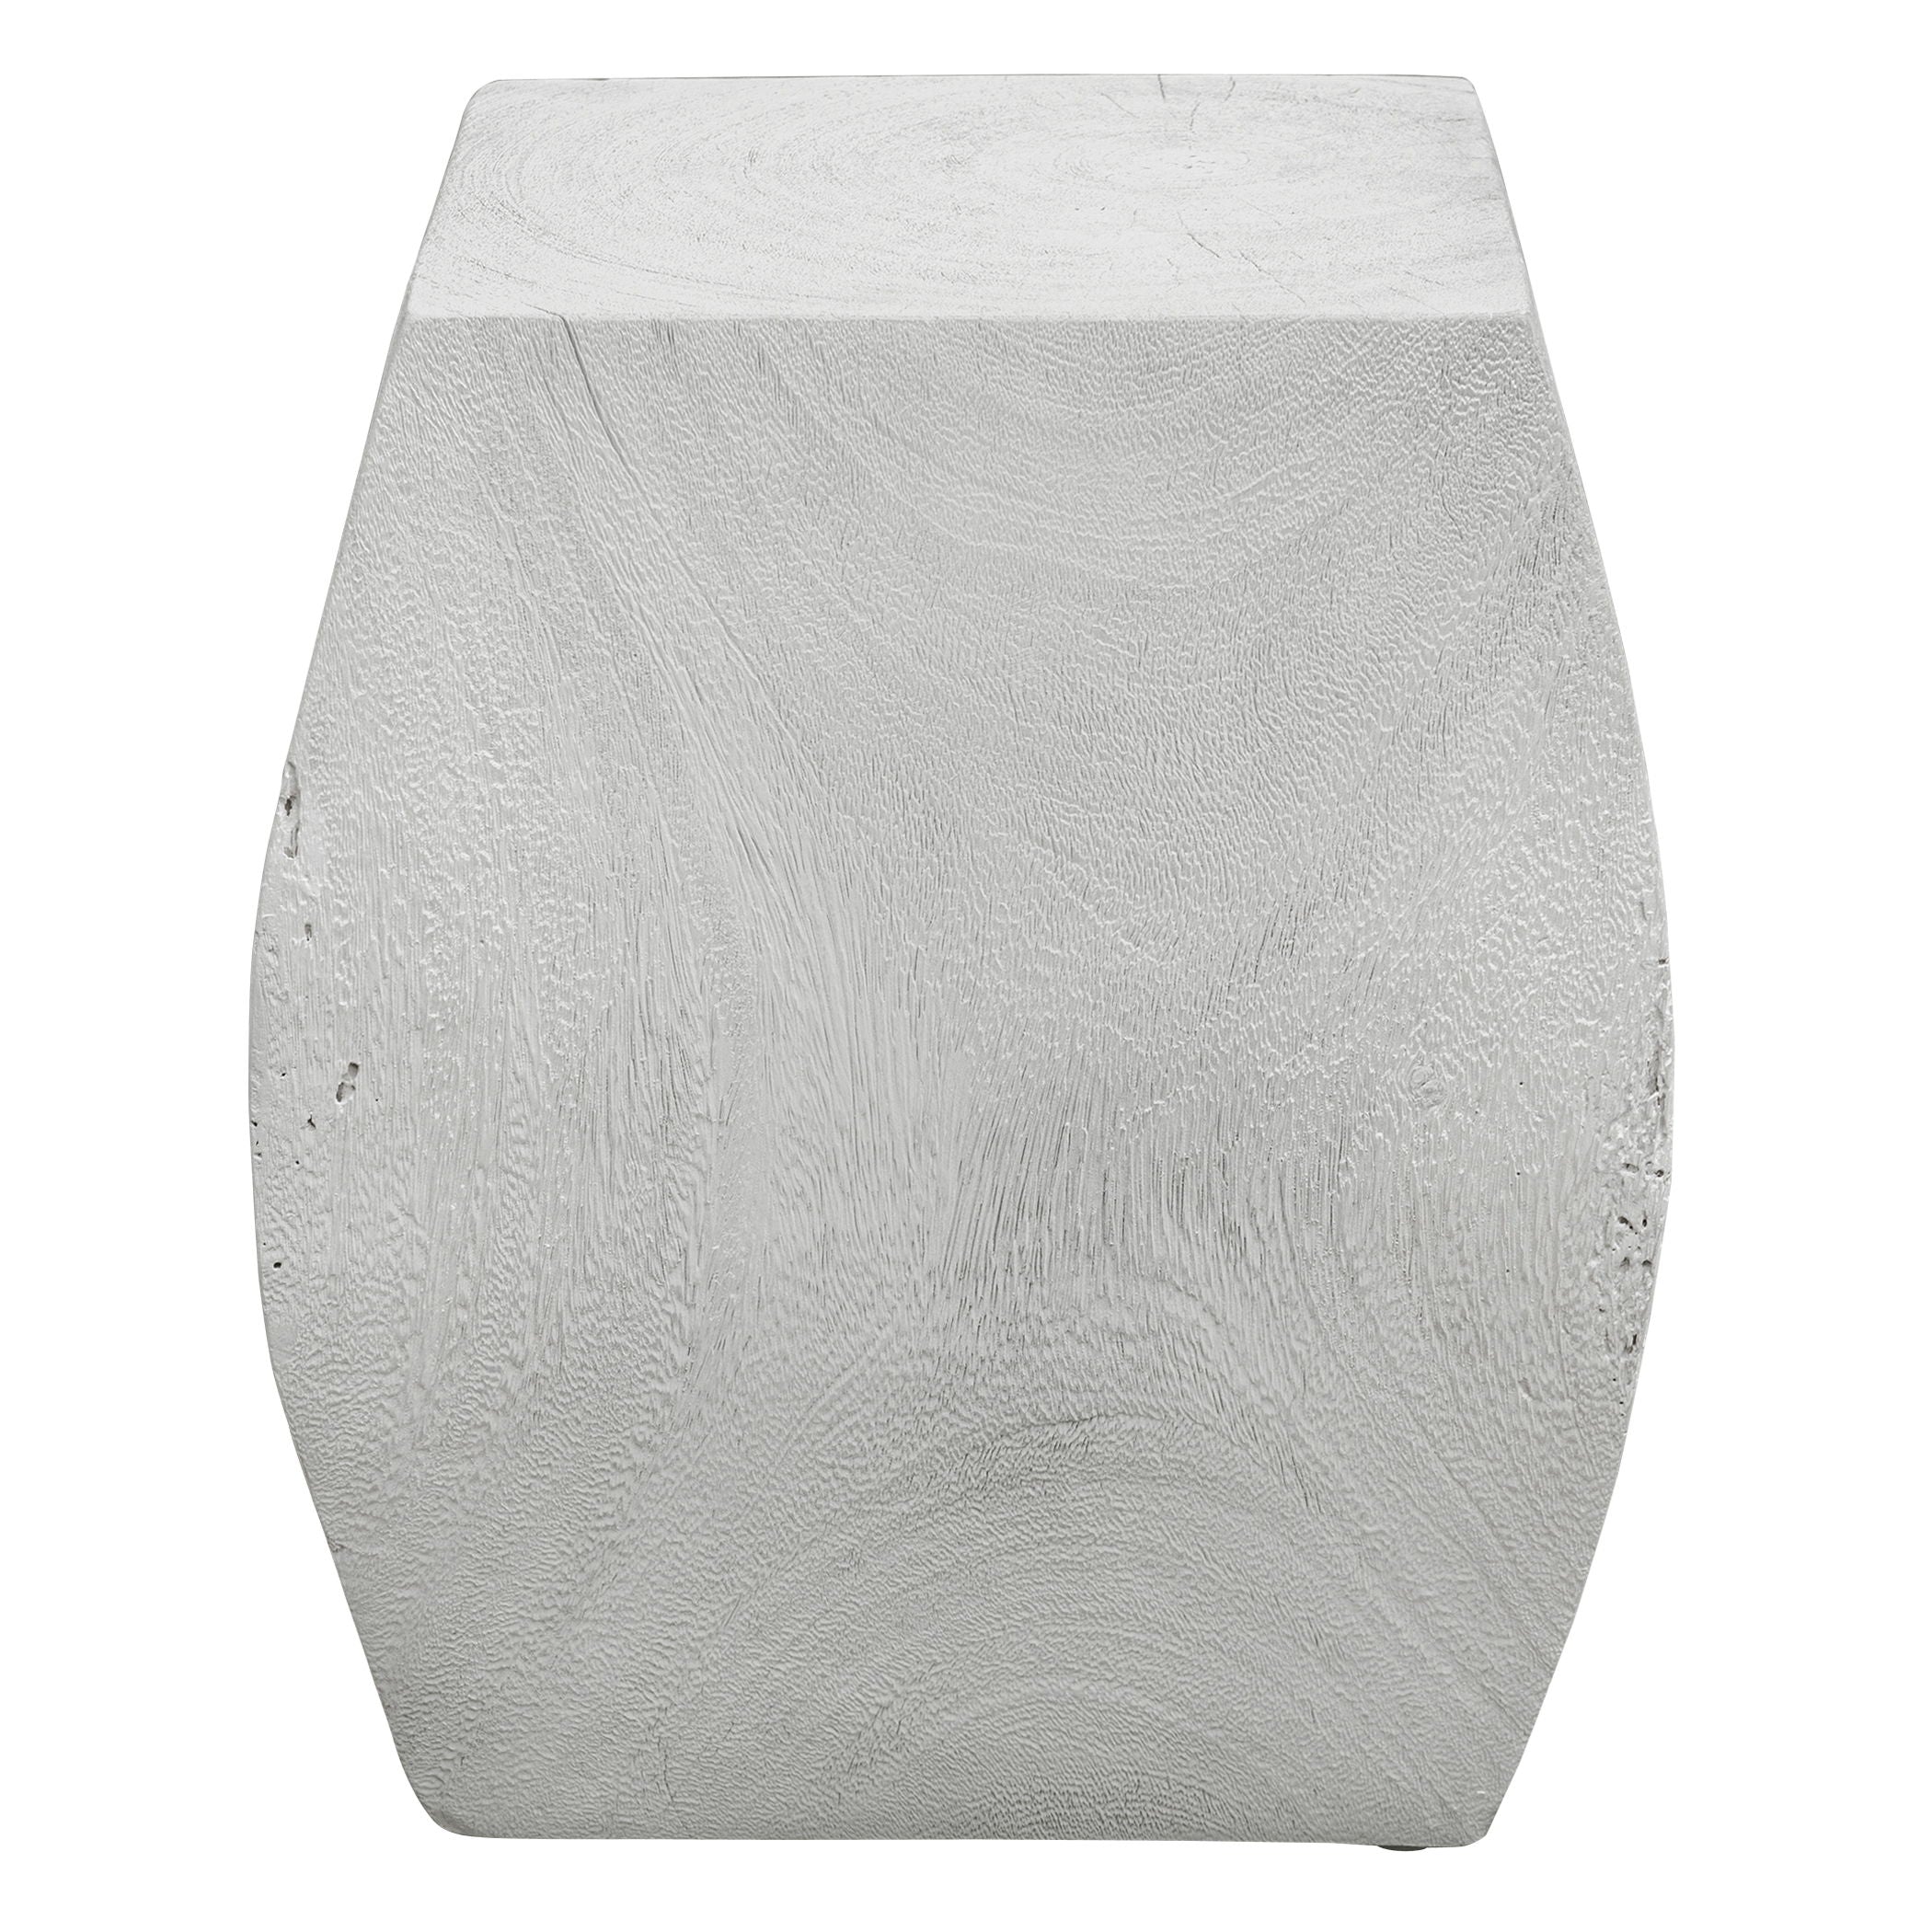 Grove - Ivory Wooden Accent Stool